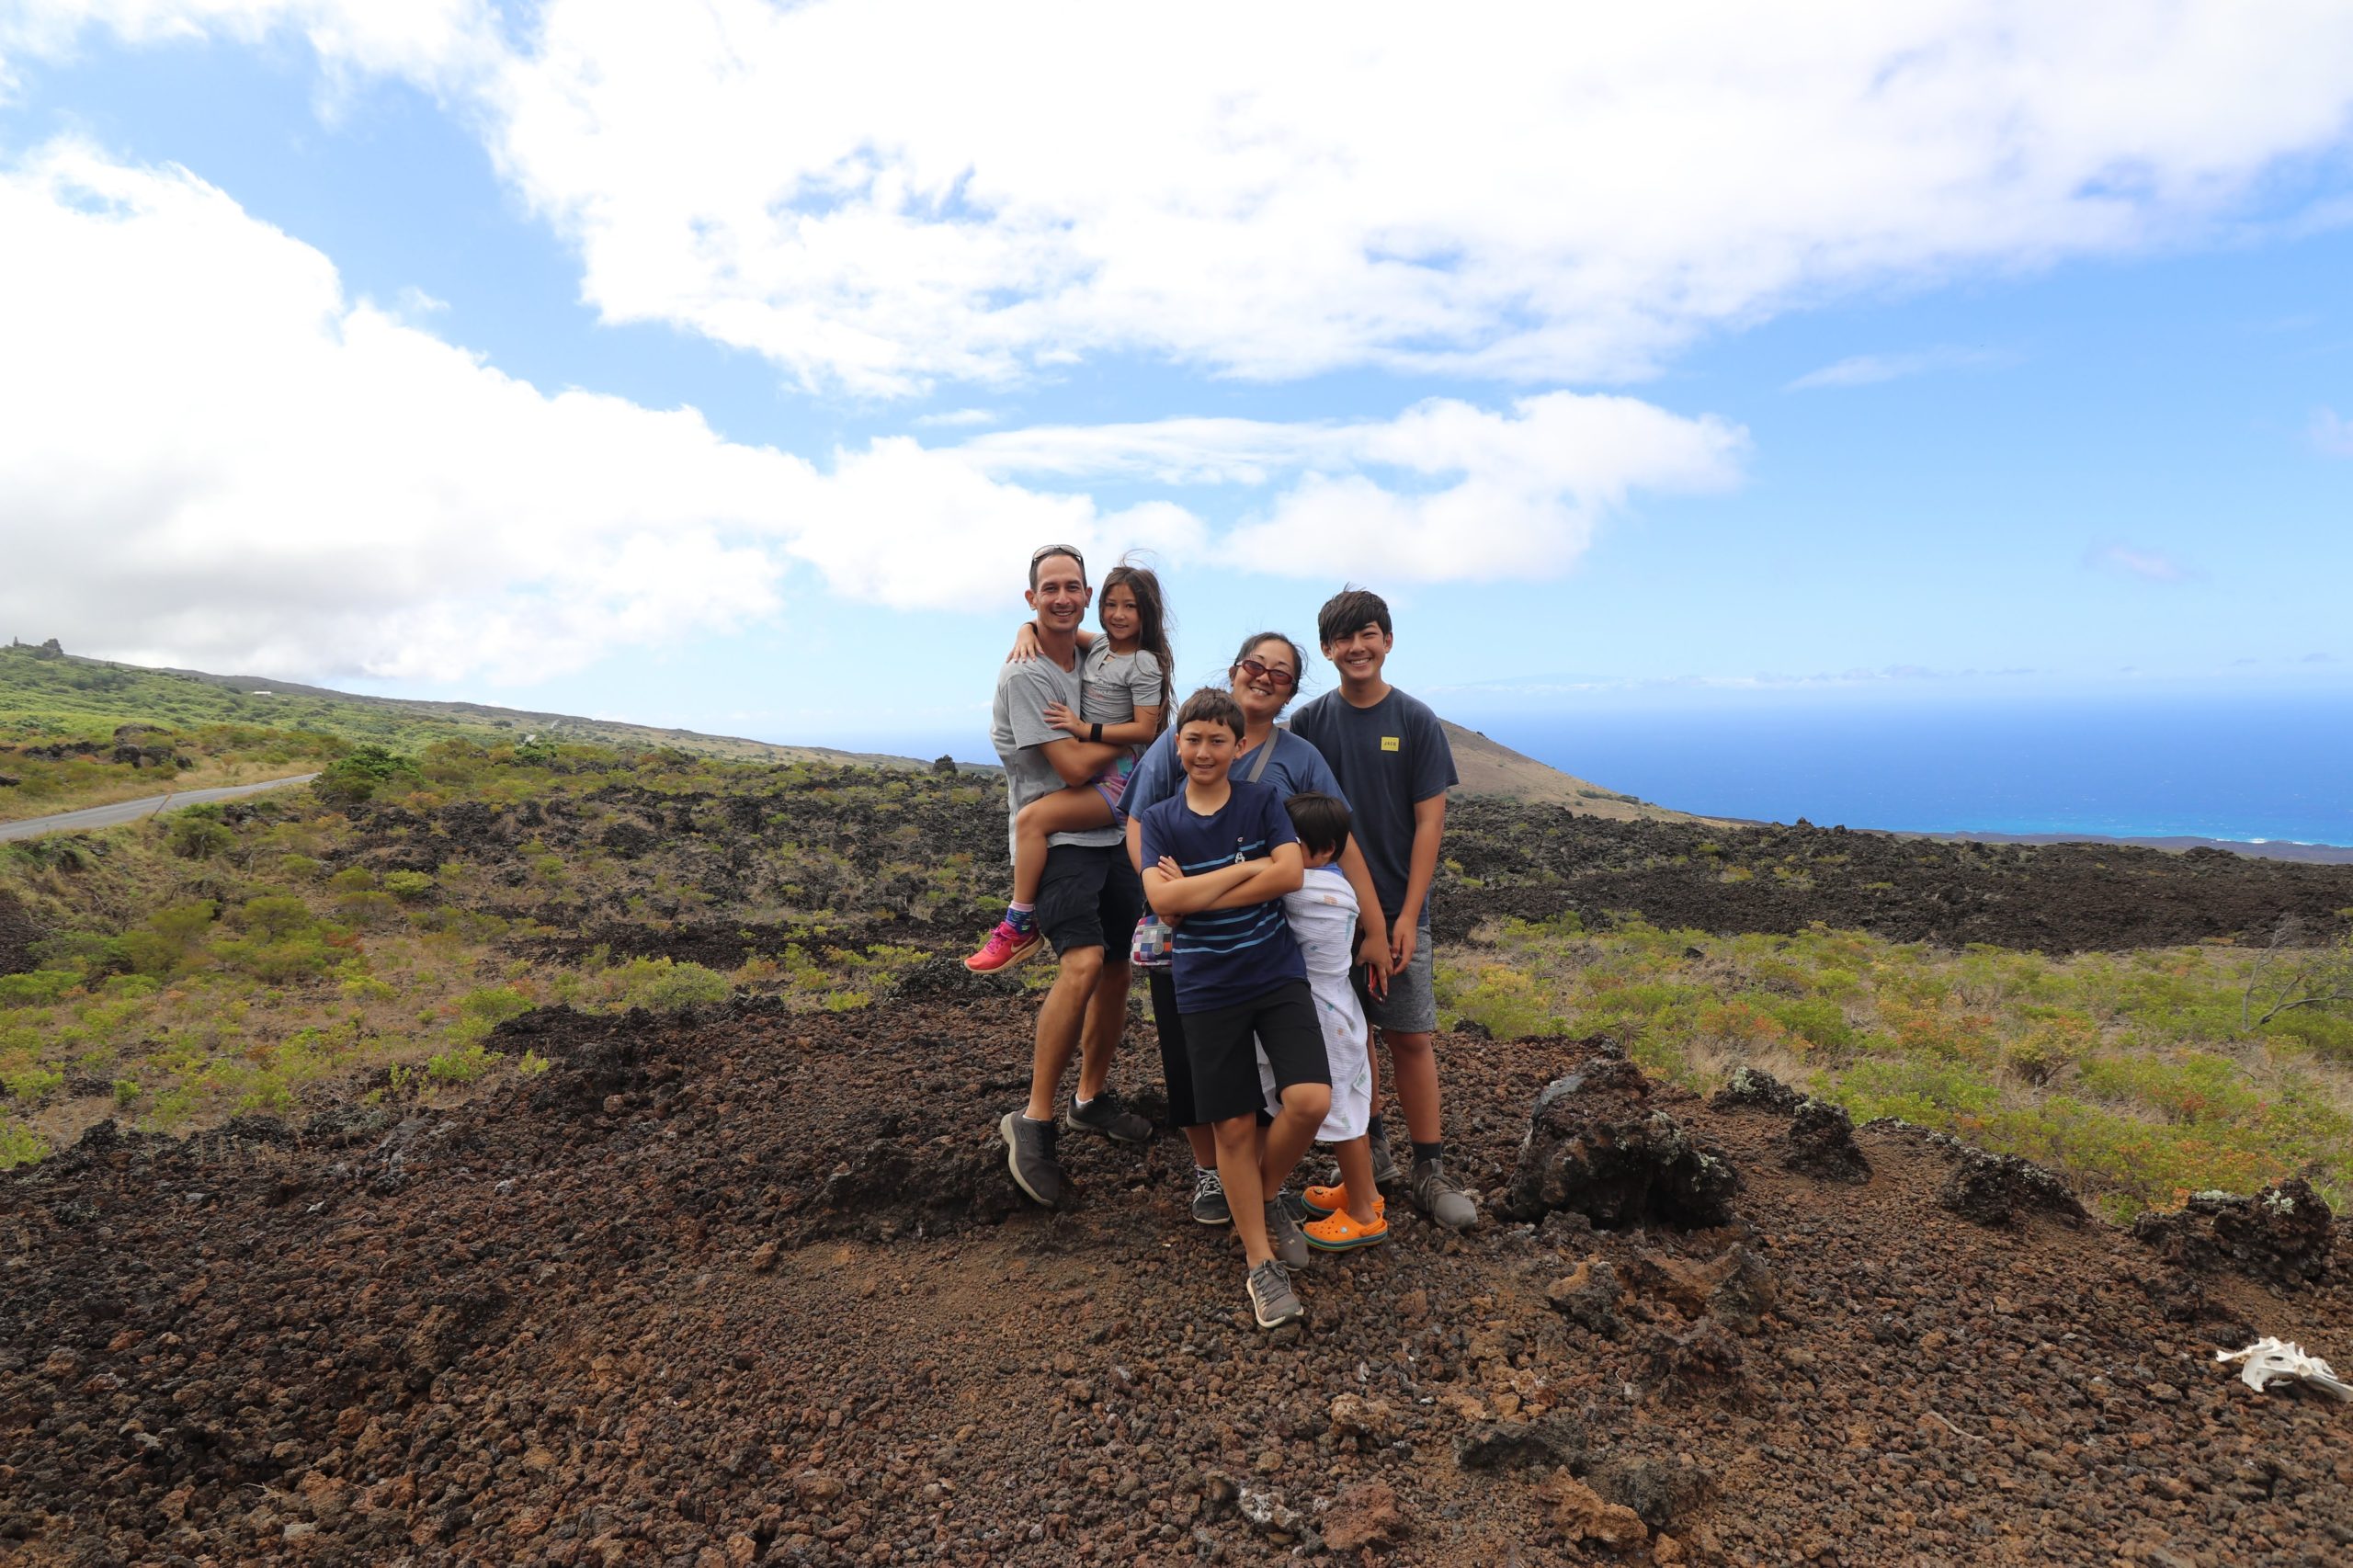 trip to hawaii cost for family of 4